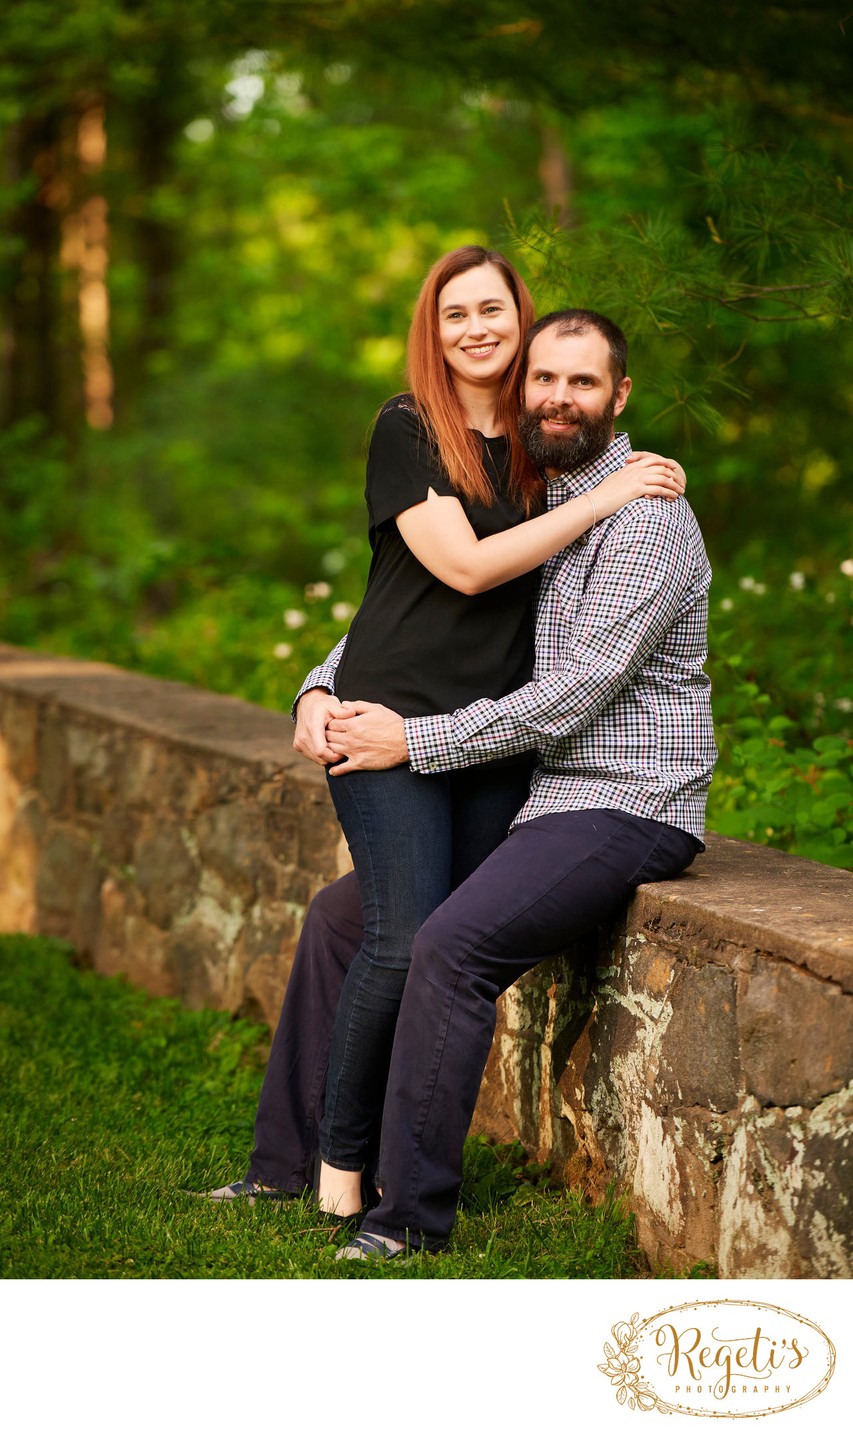 Amanda and Sean - Engagement Session - Rust Manor House